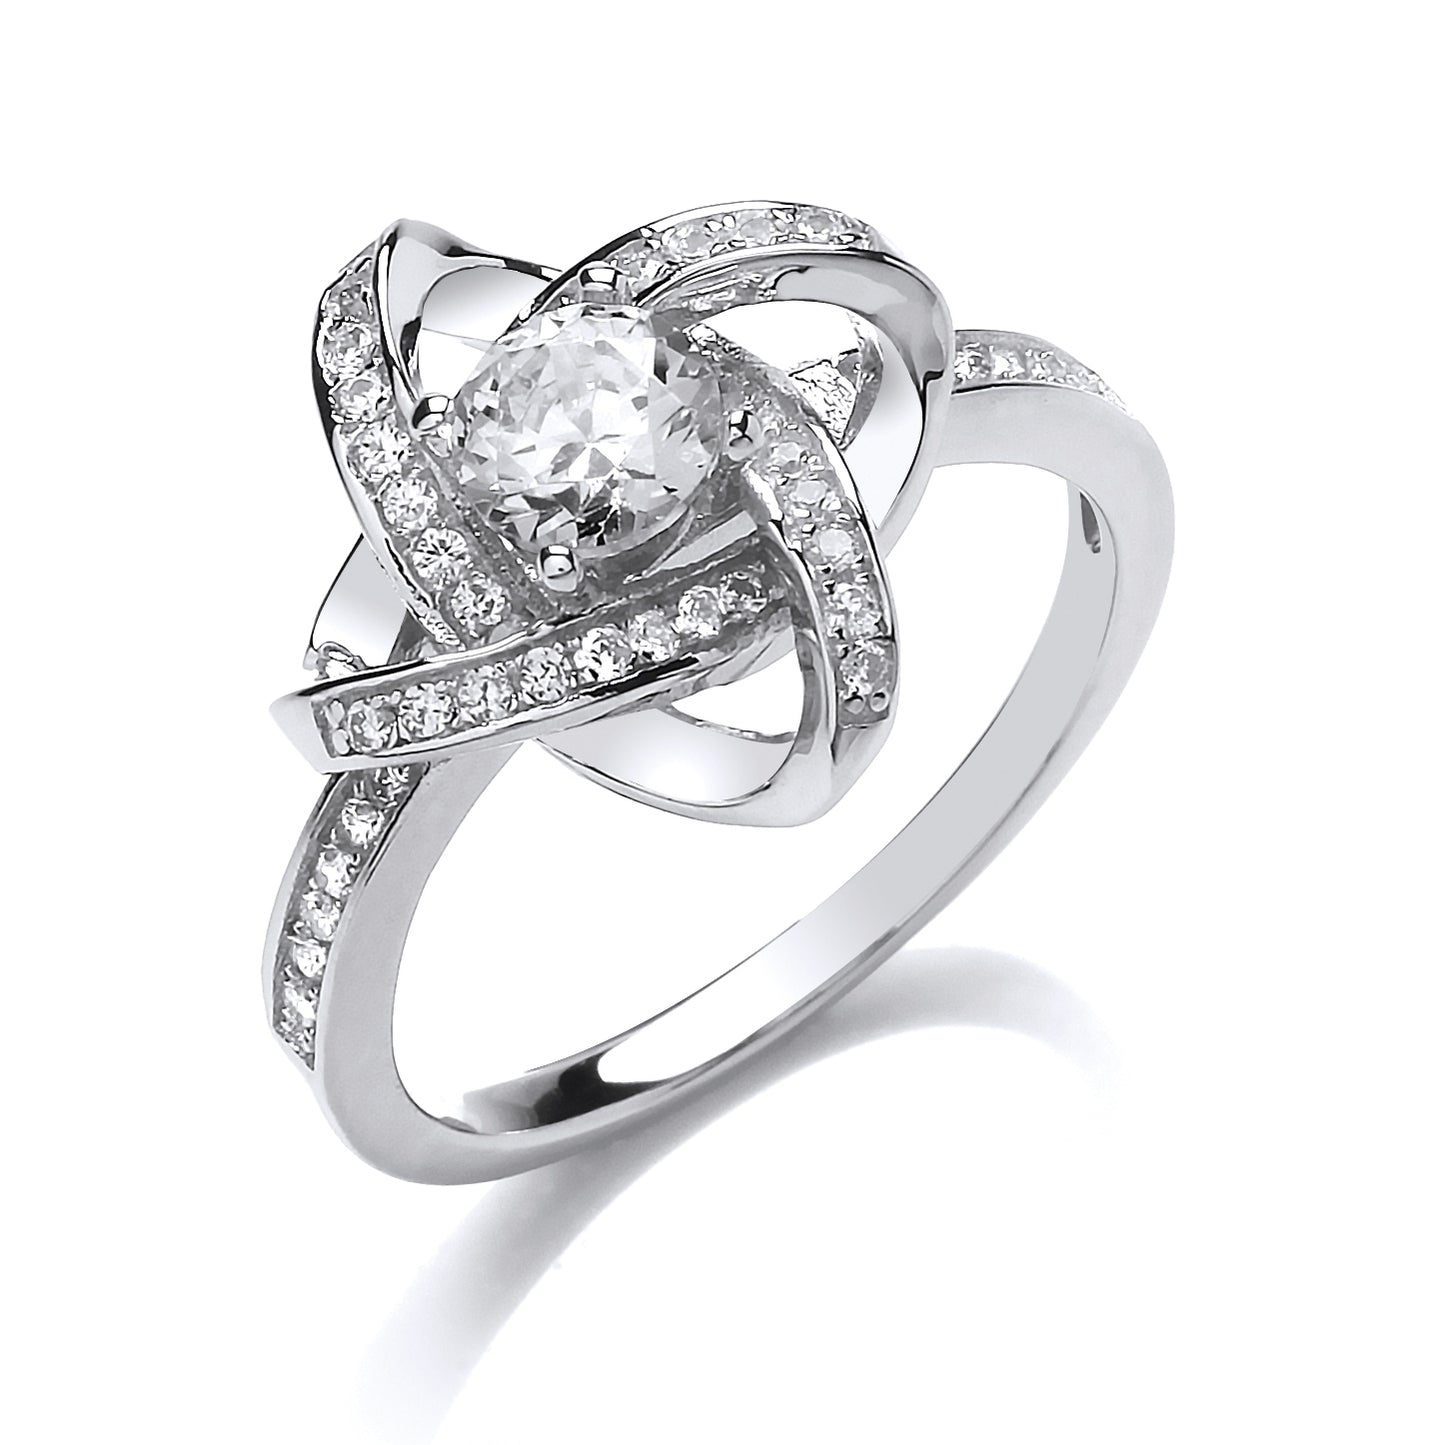 Silver  CZ Atom Halo Solitaire Engagement Ring - GVR797